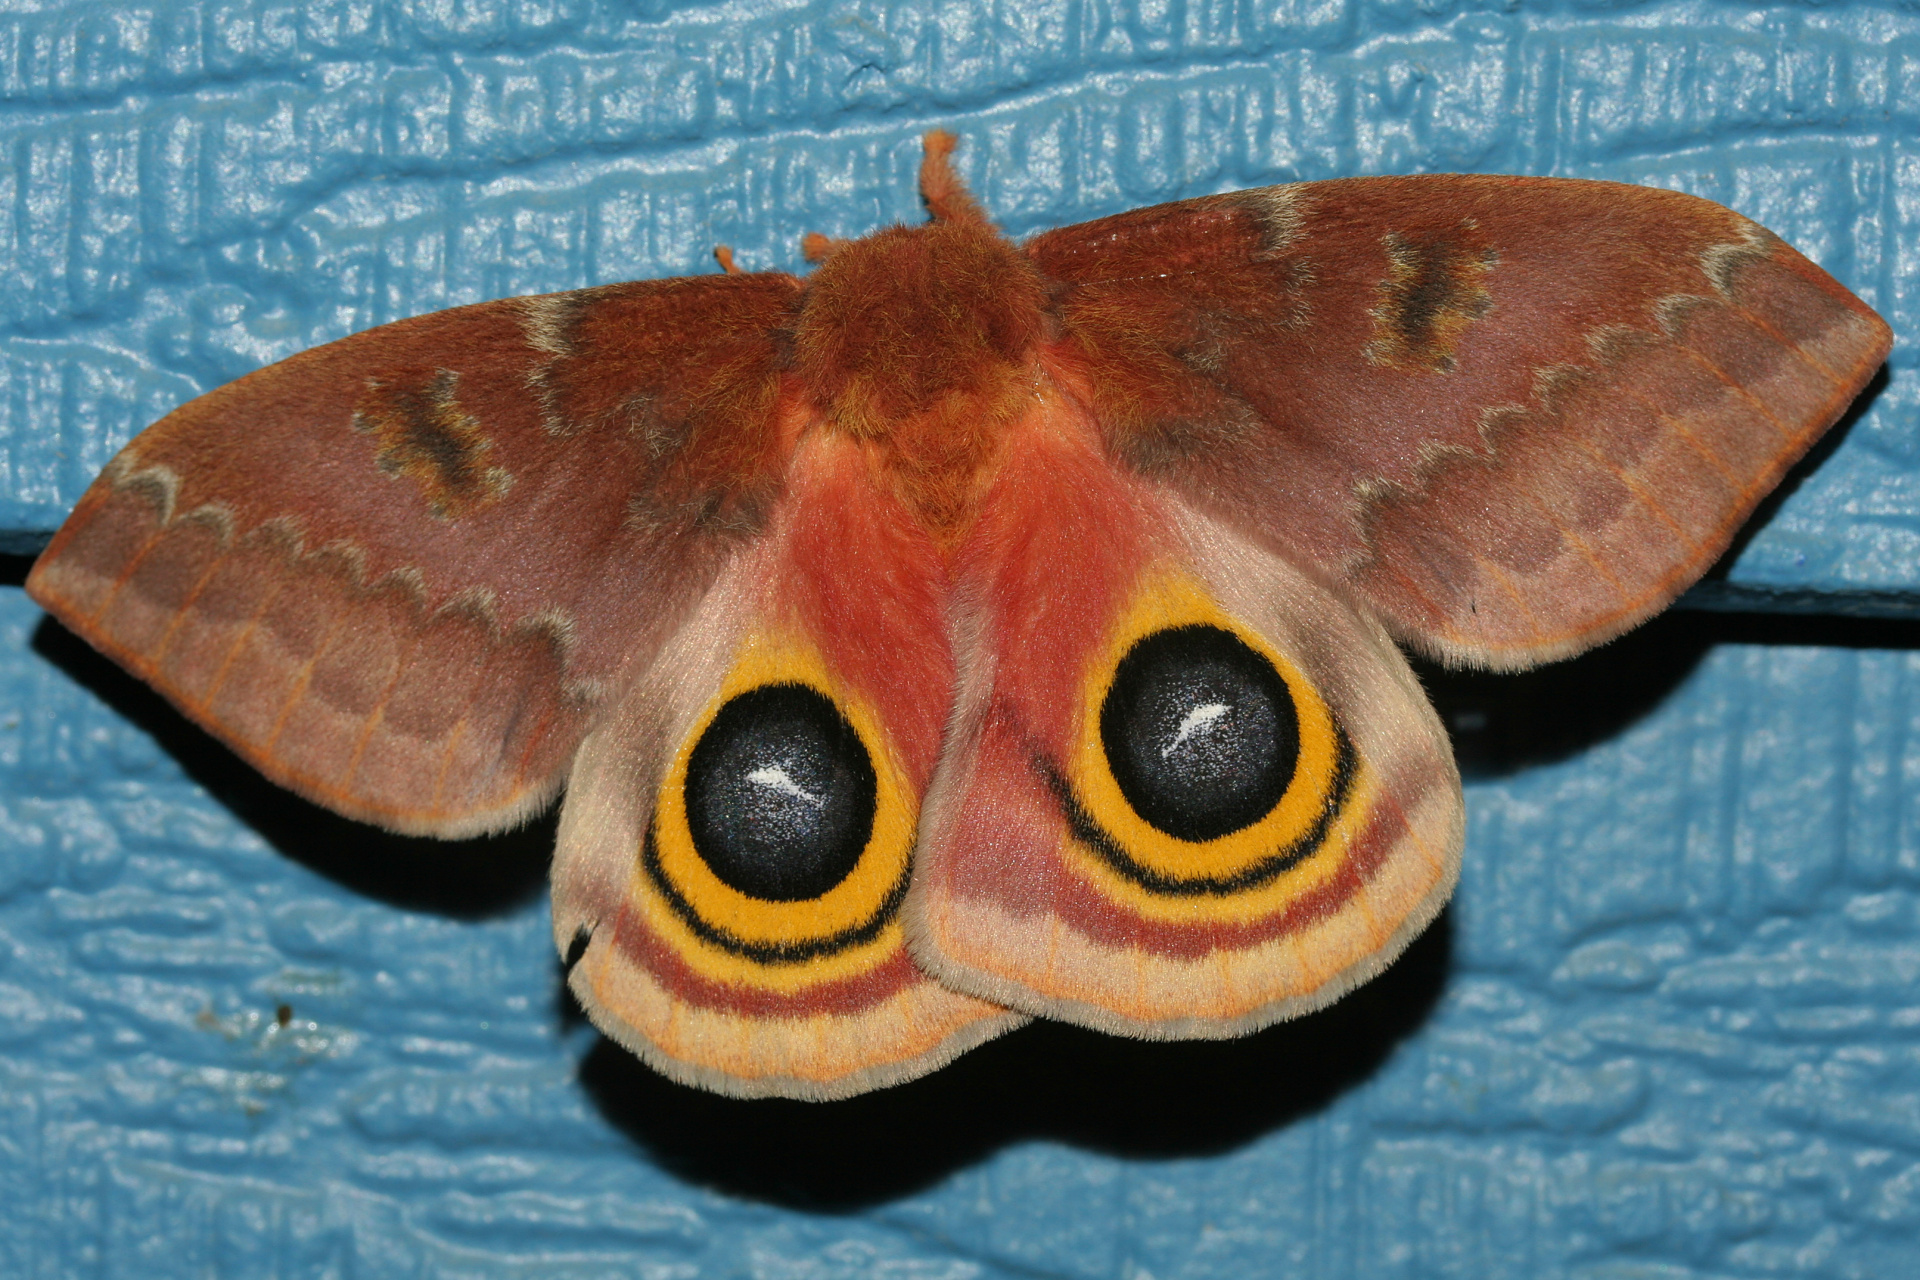 Automeris io ♀ (Travels » US Trip 2: Cheyenne Epic » Animals » Insects » Butterfies and Moths » Saturnidae)